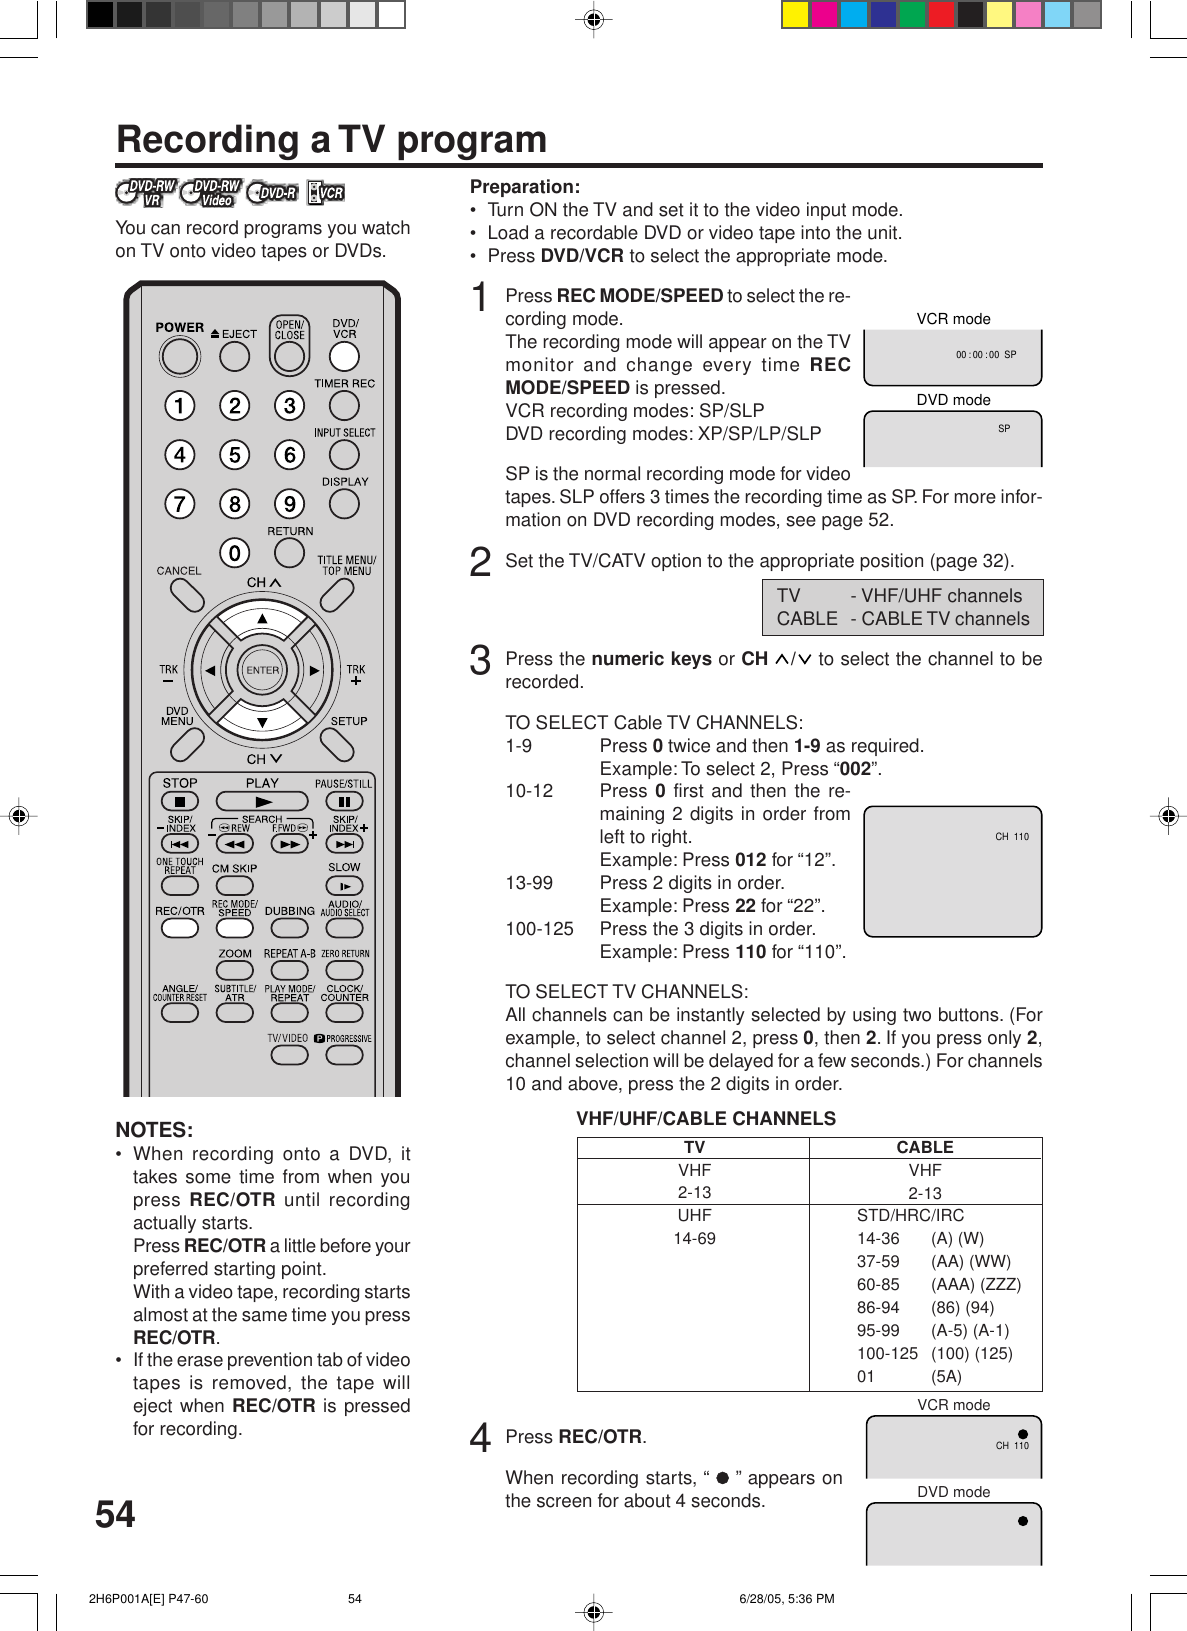 54Recording a TV programPreparation:• Turn ON the TV and set it to the video input mode.• Load a recordable DVD or video tape into the unit.• Press DVD/VCR to select the appropriate mode.1Press REC MODE/SPEED to select the re-cording mode.The recording mode will appear on the TVmonitor and change every time RECMODE/SPEED is pressed.VCR recording modes: SP/SLPDVD recording modes: XP/SP/LP/SLPSP is the normal recording mode for videotapes. SLP offers 3 times the recording time as SP. For more infor-mation on DVD recording modes, see page 52.2Set the TV/CATV option to the appropriate position (page 32).3Press the numeric keys or CH  /  to select the channel to berecorded.TO SELECT Cable TV CHANNELS:1-9 Press 0 twice and then 1-9 as required.Example: To select 2, Press “002”.10-12 Press 0 first and then the re-maining 2 digits in order fromleft to right.Example: Press 012 for “12”.13-99 Press 2 digits in order.Example: Press 22 for “22”.100-125 Press the 3 digits in order.Example: Press 110 for “110”.TO SELECT TV CHANNELS:All channels can be instantly selected by using two buttons. (Forexample, to select channel 2, press 0, then 2. If you press only 2,channel selection will be delayed for a few seconds.) For channels10 and above, press the 2 digits in order.VHF/UHF/CABLE CHANNELS4Press REC/OTR.When recording starts, “   ” appears onthe screen for about 4 seconds.NOTES:• When recording onto a DVD, ittakes some time from when youpress REC/OTR until recordingactually starts.Press REC/OTR a little before yourpreferred starting point.With a video tape, recording startsalmost at the same time you pressREC/OTR.• If the erase prevention tab of videotapes is removed, the tape willeject when REC/OTR is pressedfor recording.You can record programs you watchon TV onto video tapes or DVDs.TVVHF2-13UHF14-69CABLEVHF2-13STD/HRC/IRC14-36 (A) (W)37-59 (AA) (WW)60-85 (AAA) (ZZZ)86-94 (86) (94)95-99 (A-5) (A-1)100-125 (100) (125)01 (5A)TV - VHF/UHF channelsCABLE - CABLE TV channels00 : 00 : 00  SPSPDVD modeVCR modeCH  110CH  110VCR modeDVD mode 2H6P001A[E] P47-60 6/28/05, 5:36 PM54